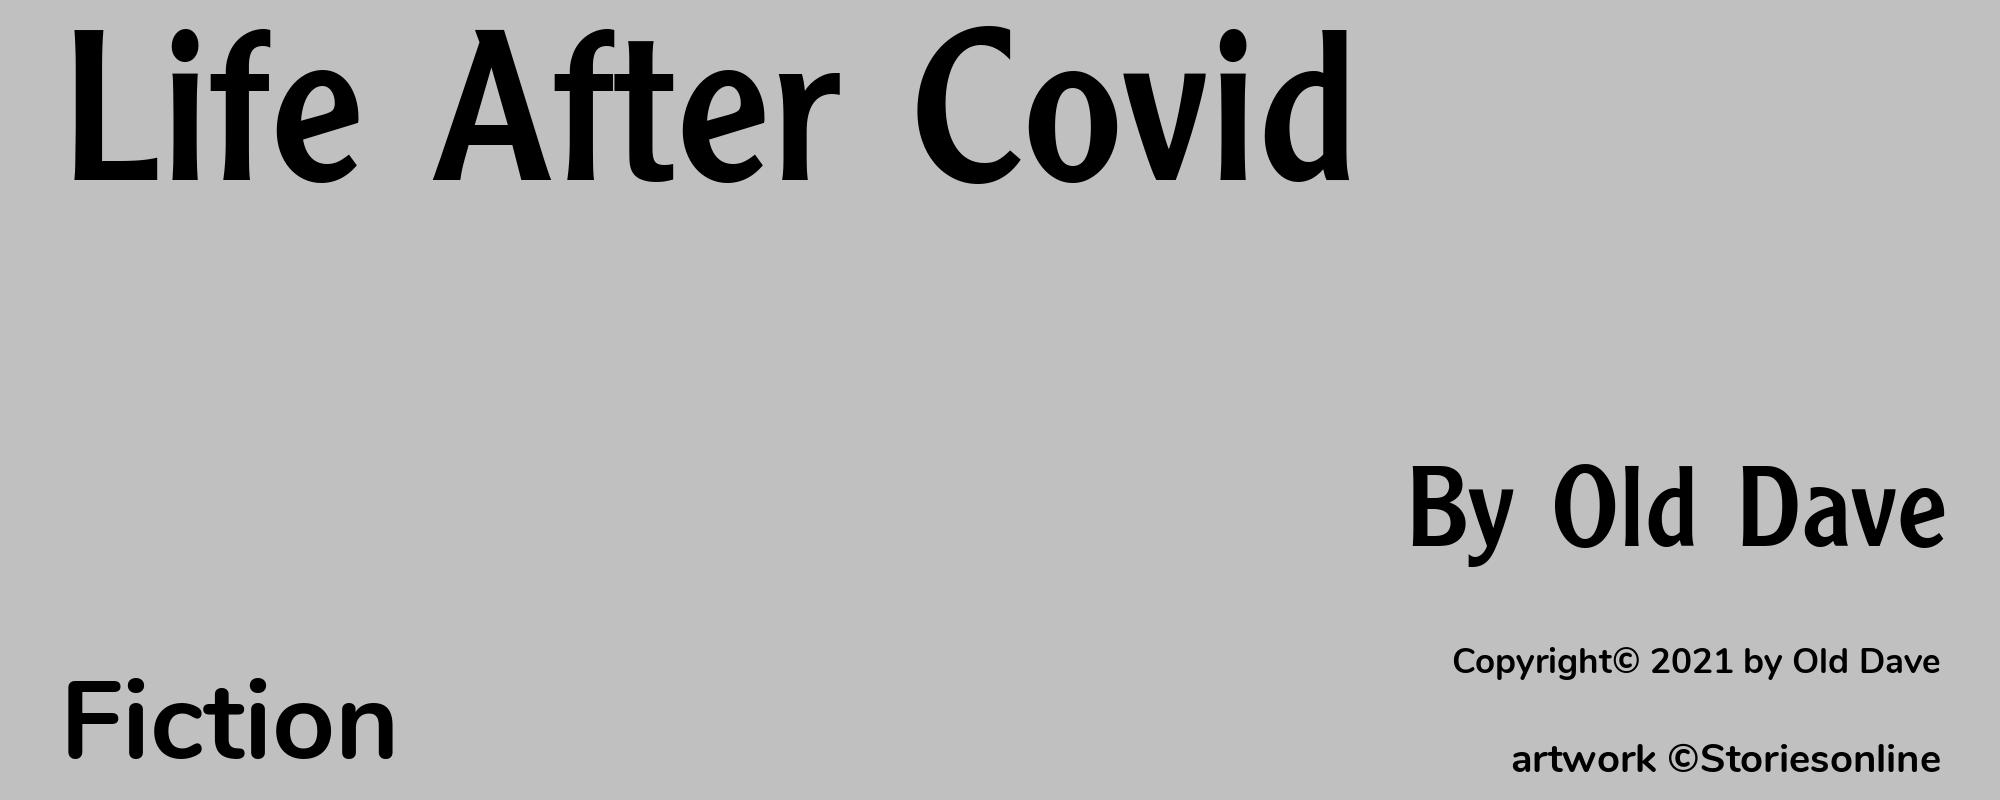 Life After Covid - Cover